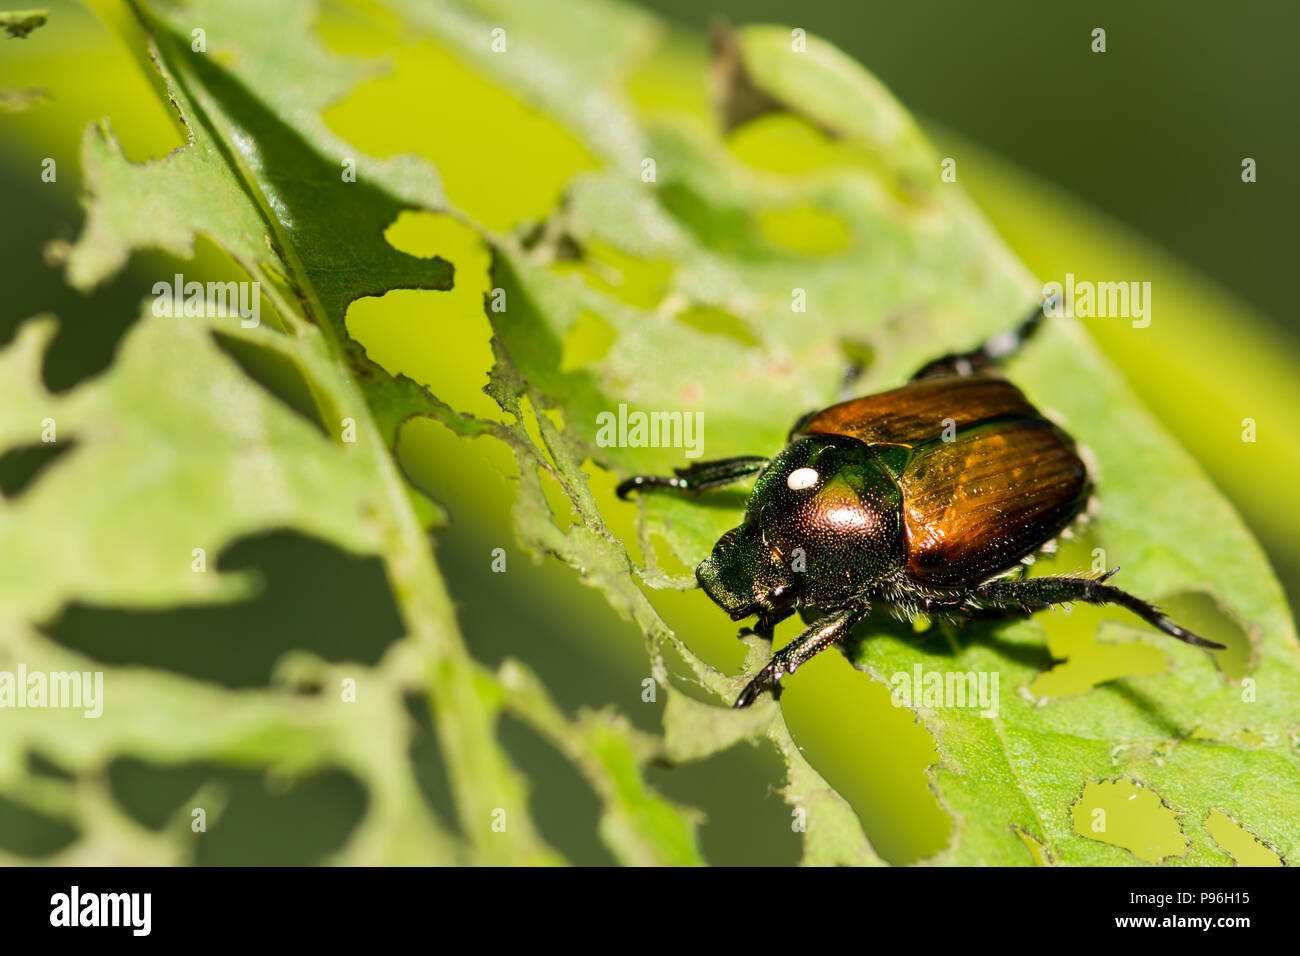 A Japanese Beetle with a Tachinid Fly egg on the thorax. Stock Photo